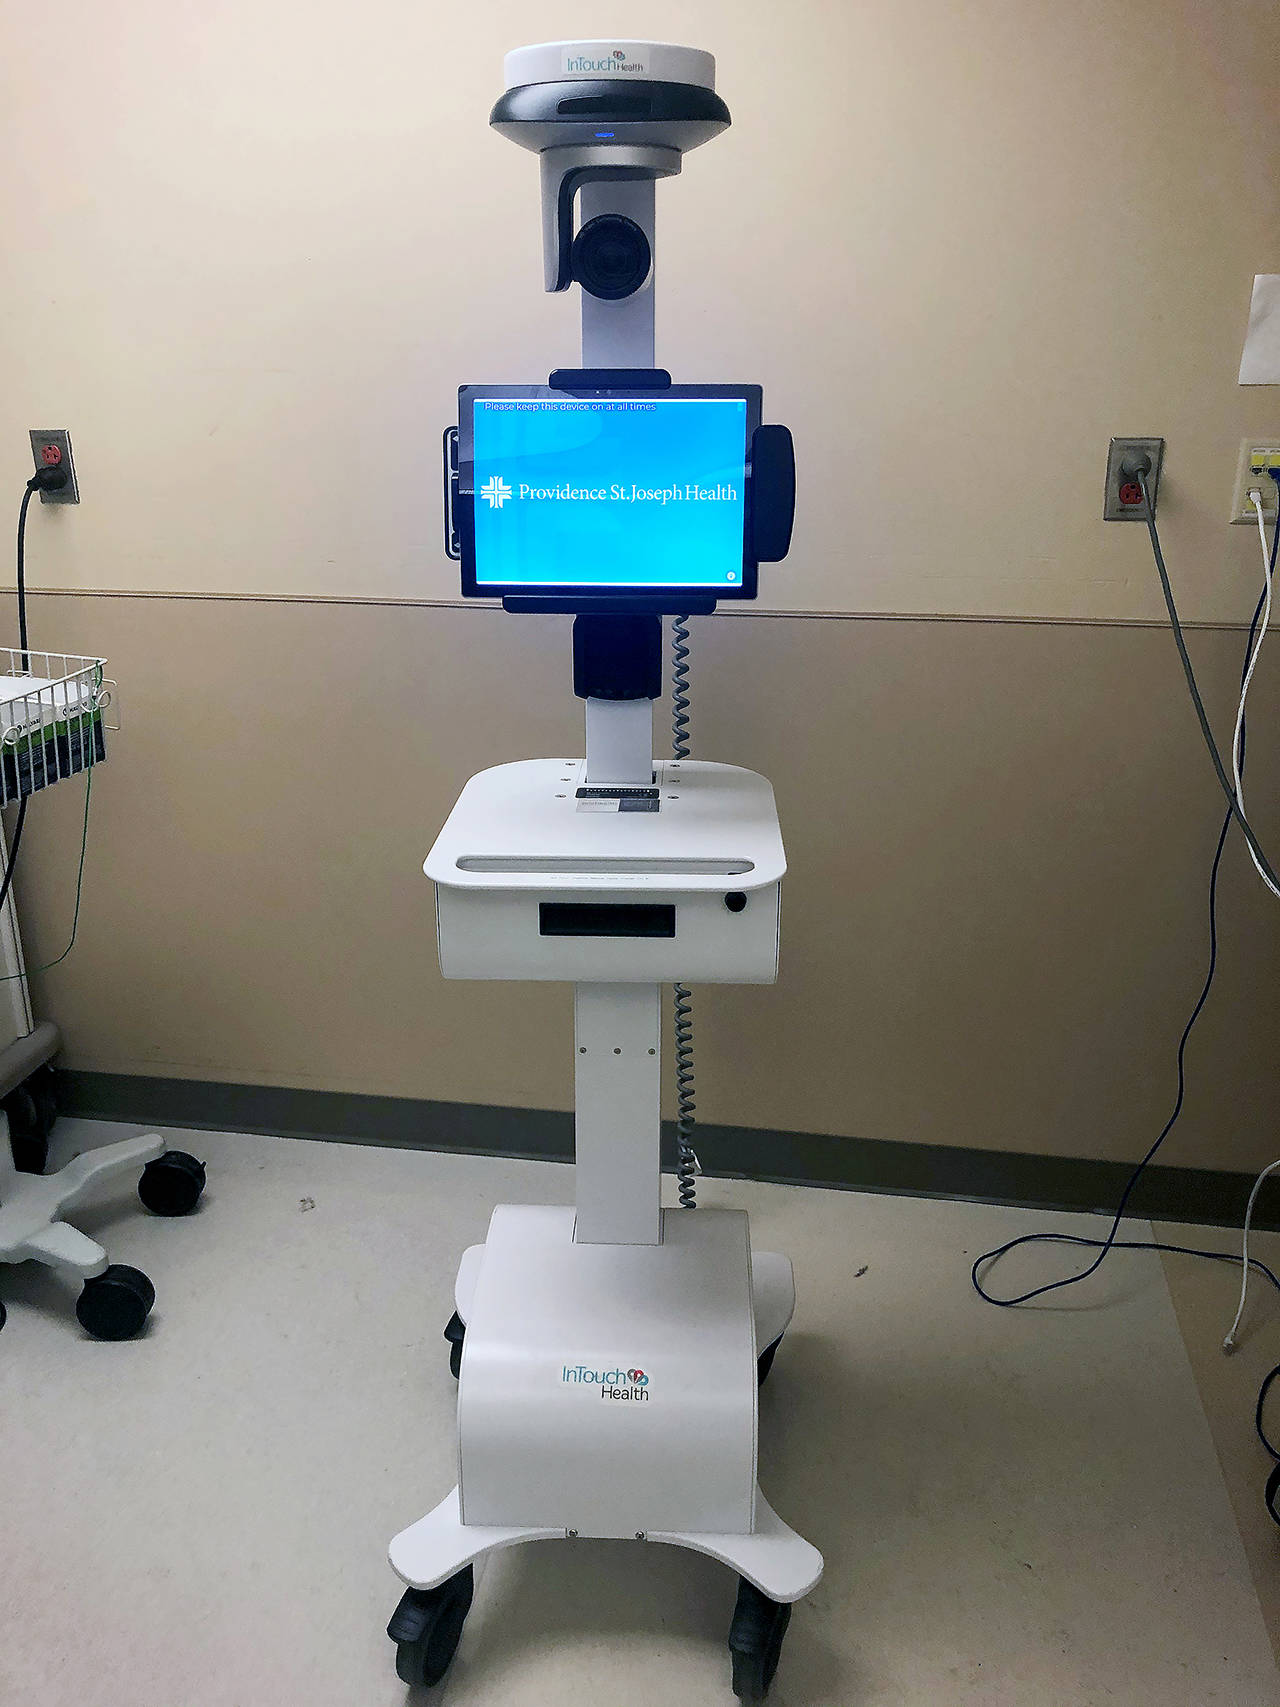 A robot helps treat the Snohomish County man in his 30s with coronavirus who since Monday has been in an isolated room at Providence Regional Medical Center Everett. Not shown is the robot’s stethoscope and microphone so the patient can talk with the doctor, who is not in the room. (Providence Regional Medical Center)